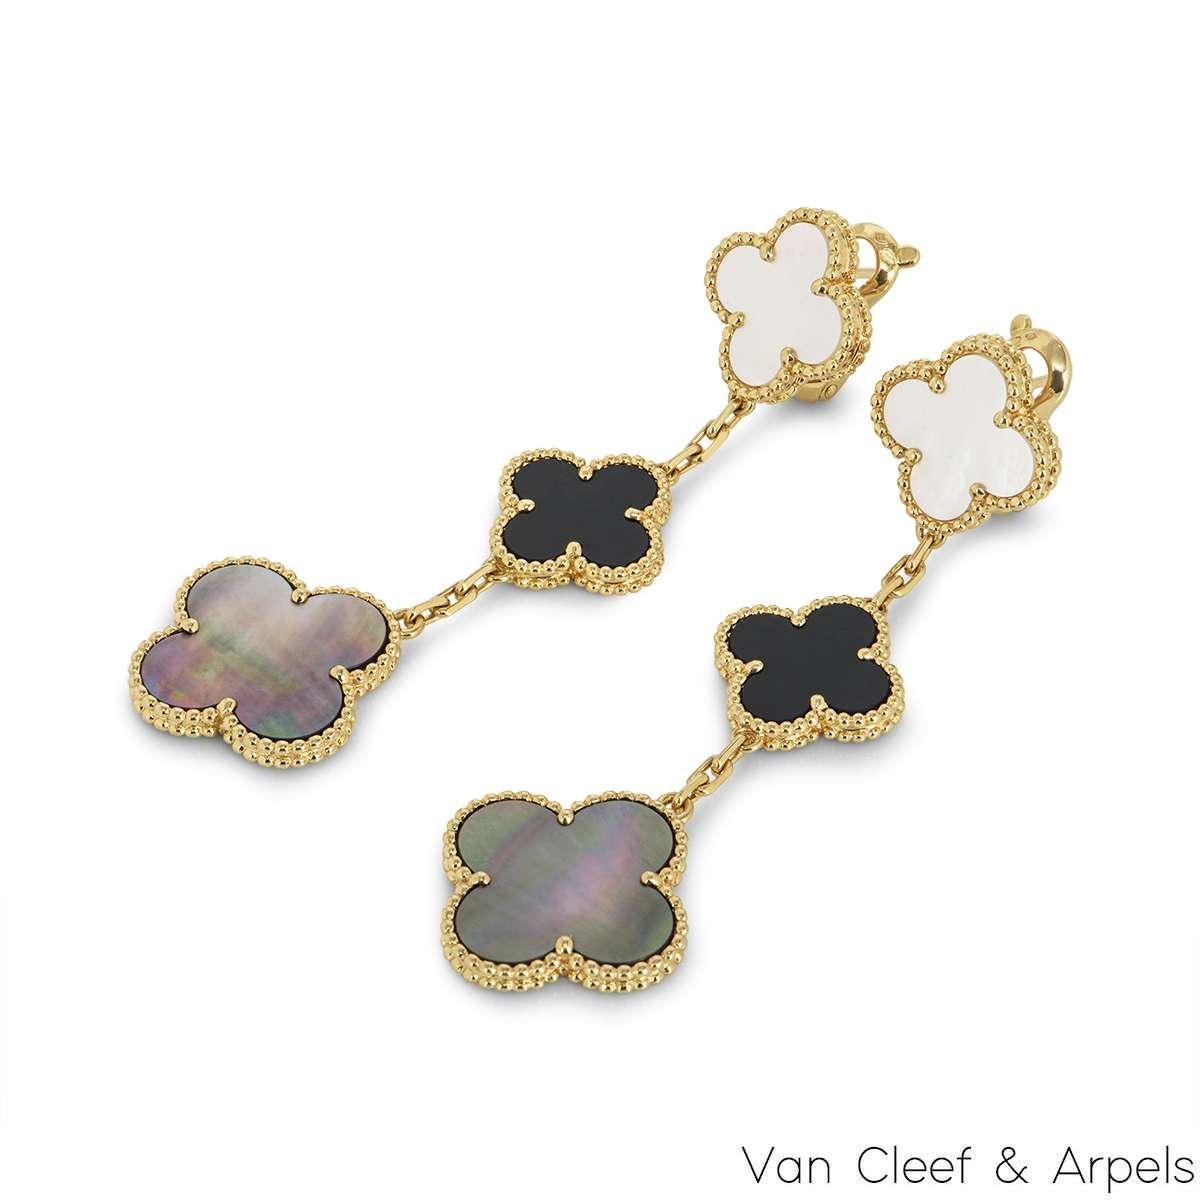 An iconic pair of 18k yellow gold earrings by Van Cleef & Arpels, from the Magic Alhambra collection. Comprising of 3 four-leaf clover motifs alternating in size complemented by a beaded outer edge, each individually set with onyx as well as white